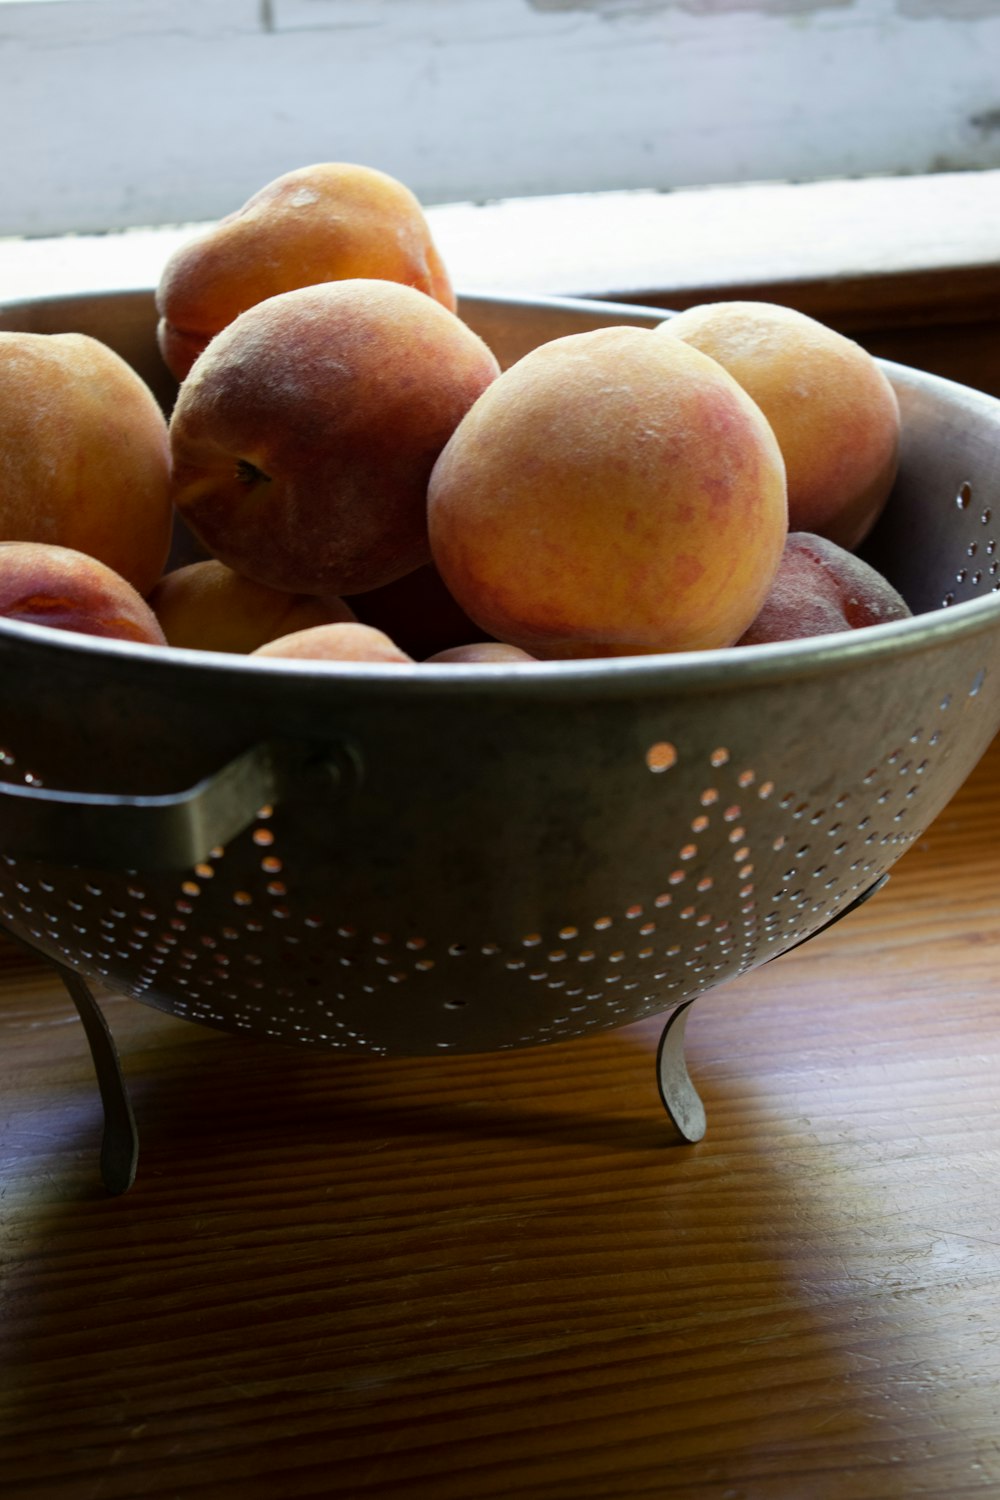 brown round fruits on stainless steel basket